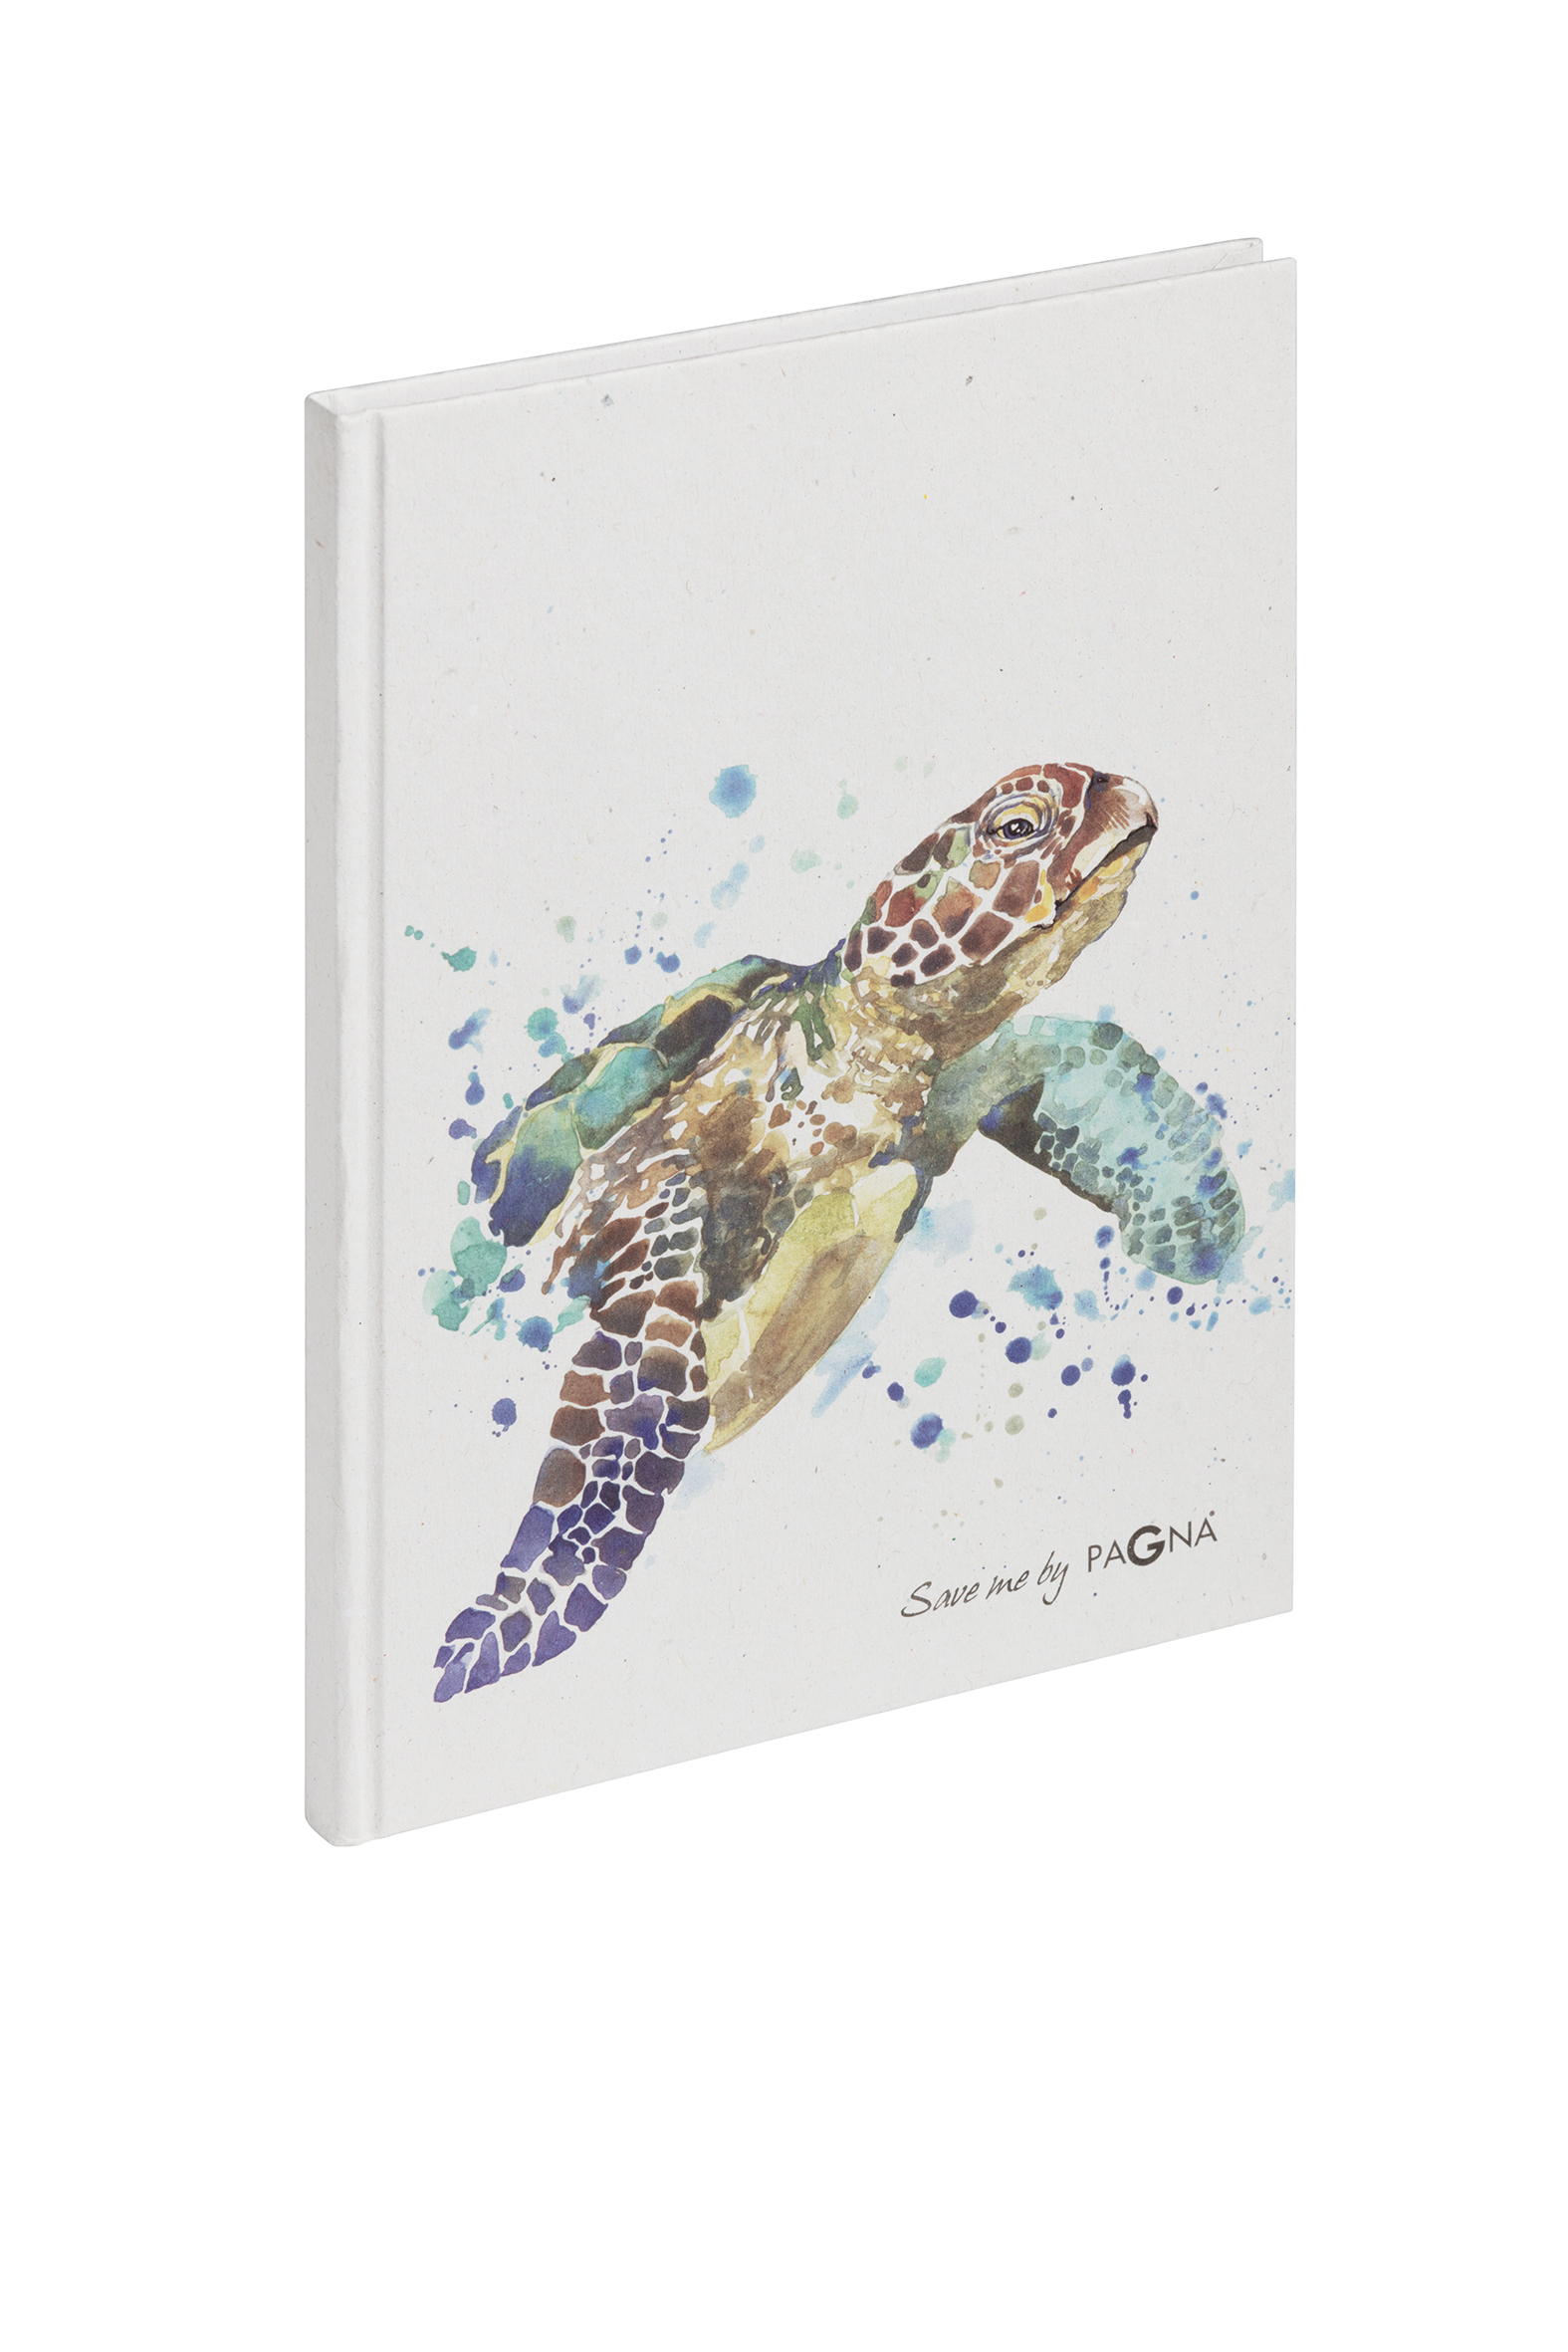 PAGNA Carnet de notes A5 26092-15 Tortue 128S, dotted lines